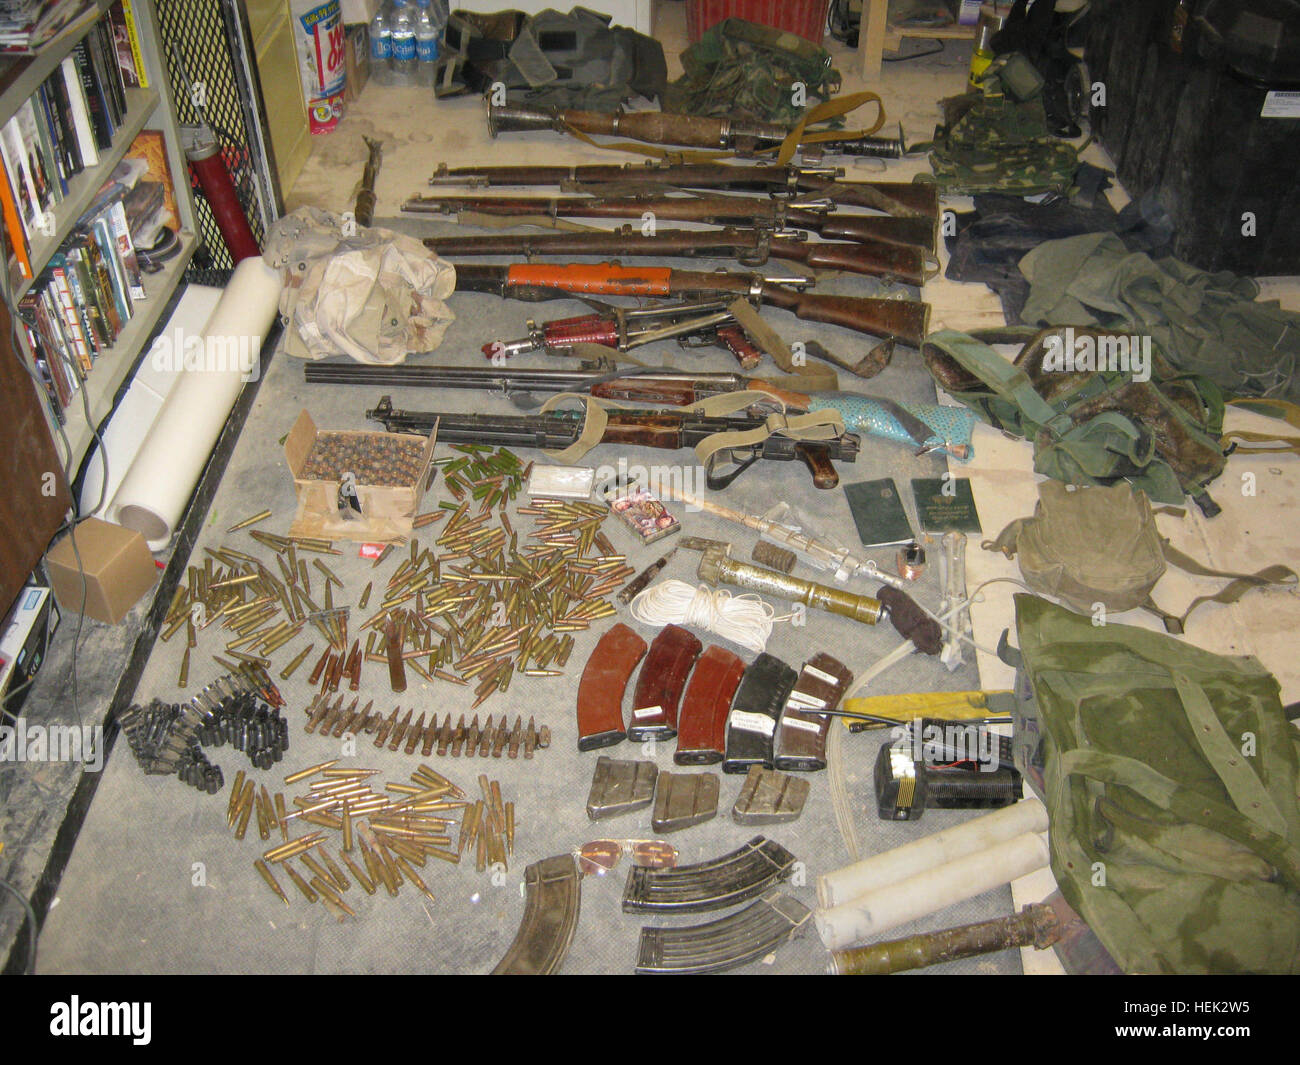 A sizeable weapons cache was discovered in Kuz Jangjay, Sayed Abad district, Wardak province, Afghanistan, April 26, following a report of a cache near the Kuz Jangjay village. Afghan National Security Forces regularly join International Security Forces for combined operations in the Sayed Abad District. The informant who led the combined force to the cache depicted received 210,000 Afghani through the Department of Defense Small Rewards Program. These and other types of munitions are used by the Taliban and insurgents to target innocent Afghan civilians and members of the International Securi Stock Photo